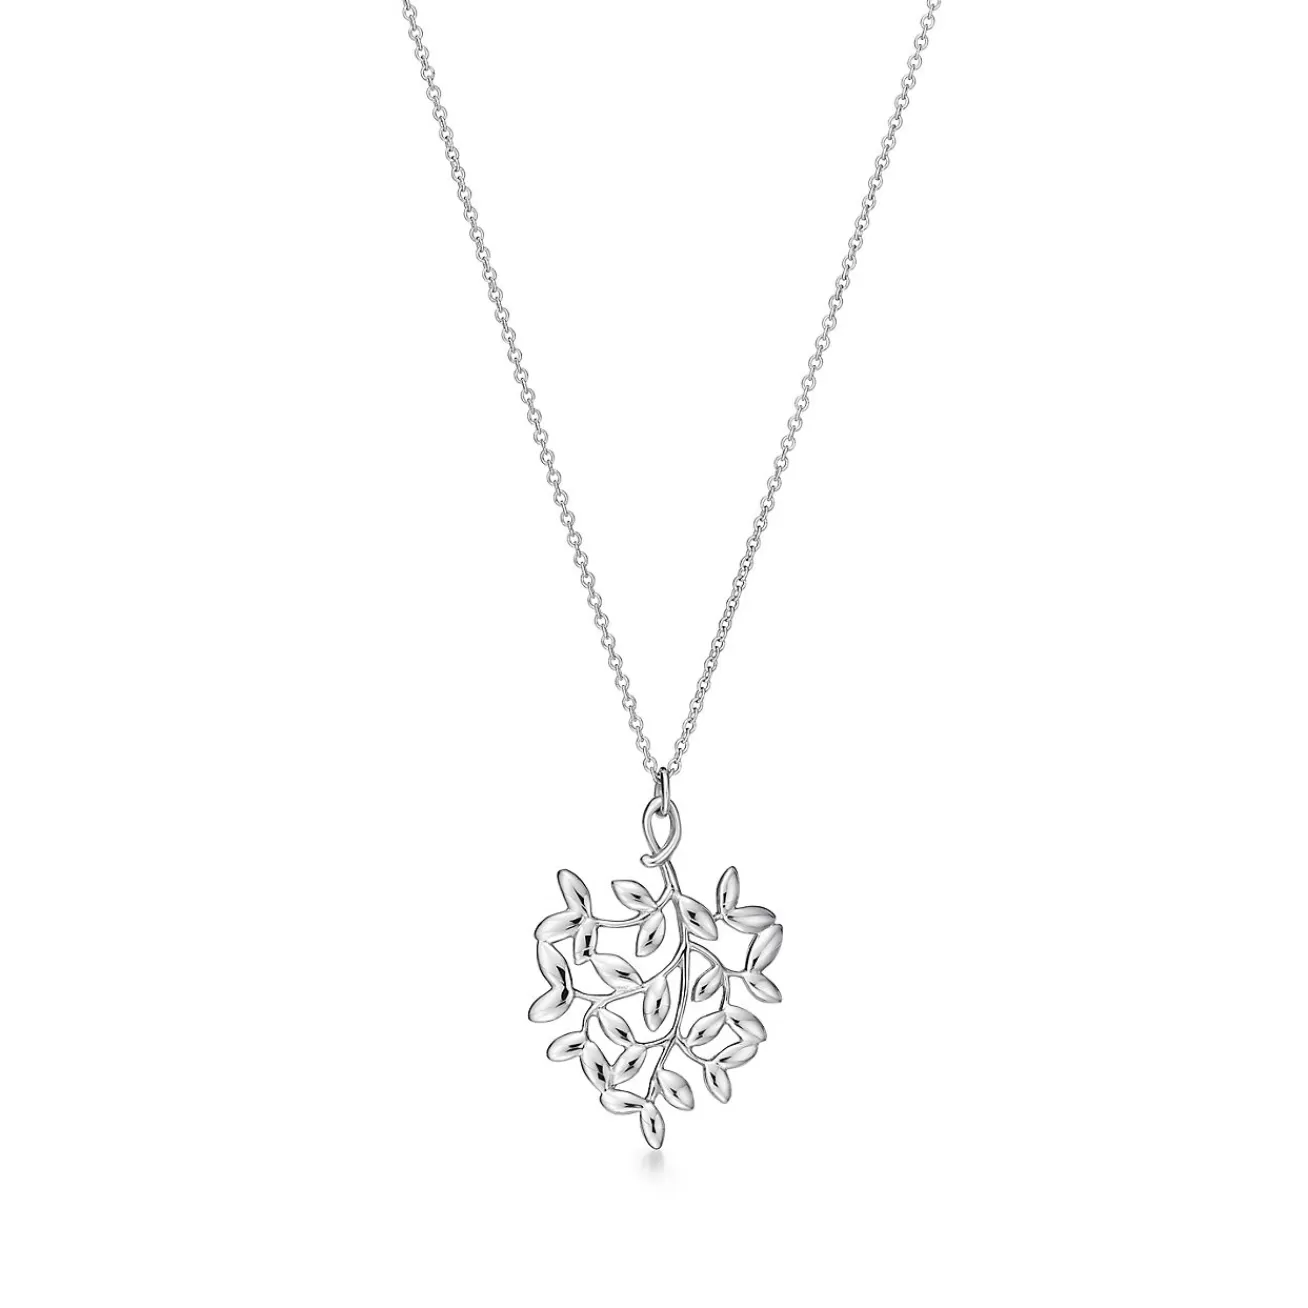 Tiffany & Co. Paloma Picasso® Olive Leaf pendant in sterling silver, small. | ^ Necklaces & Pendants | Gifts for Her